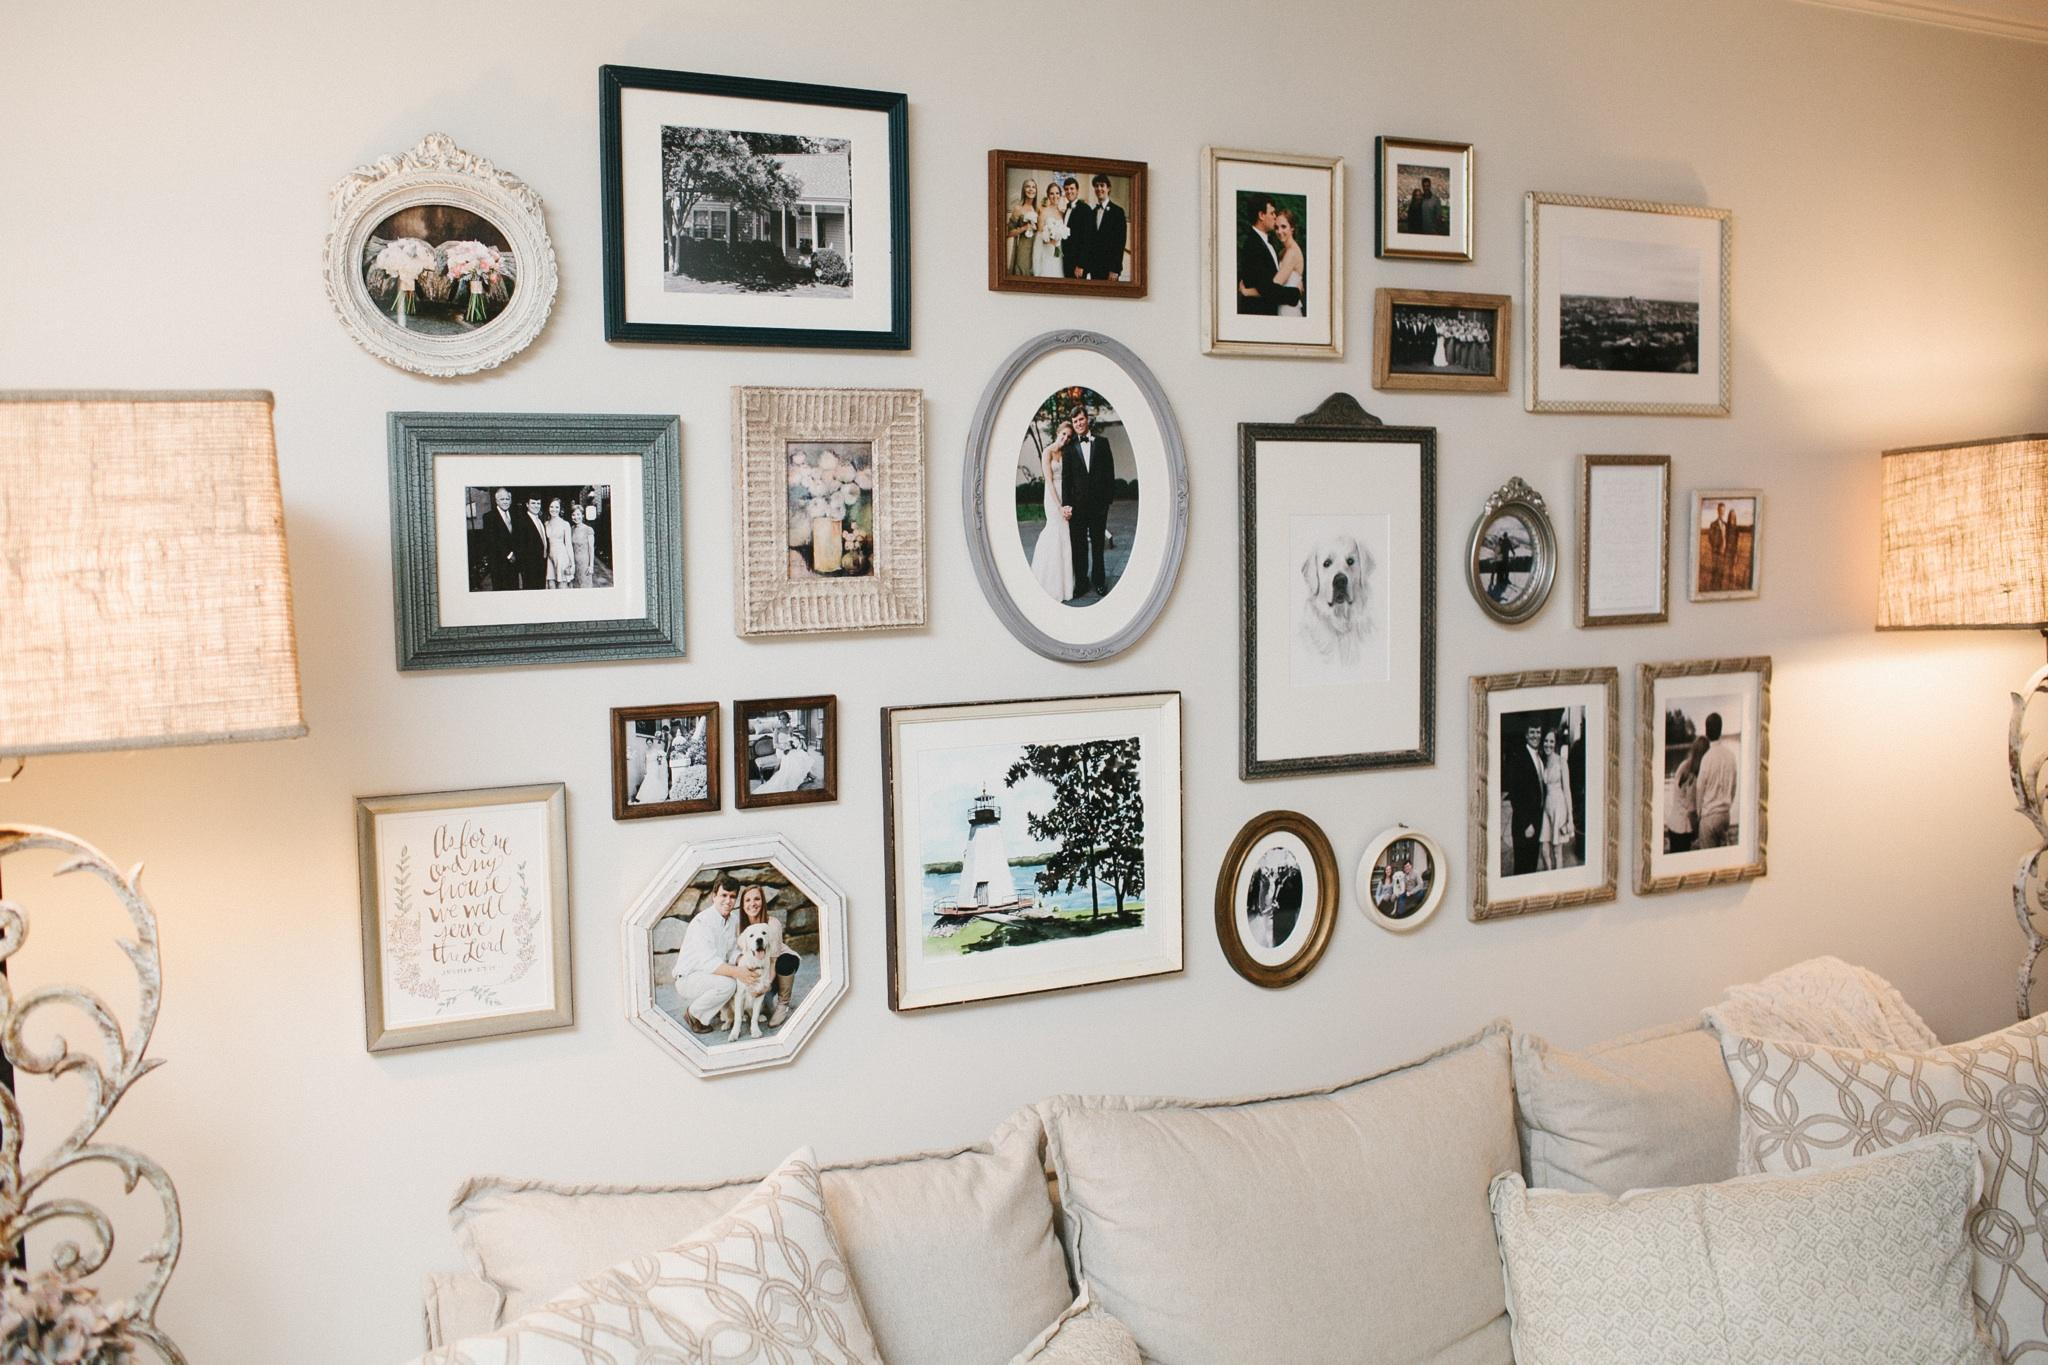 4cornersgallerywall 3 Tips for gallery wall installations from a framing professional at Four Corners Gallery